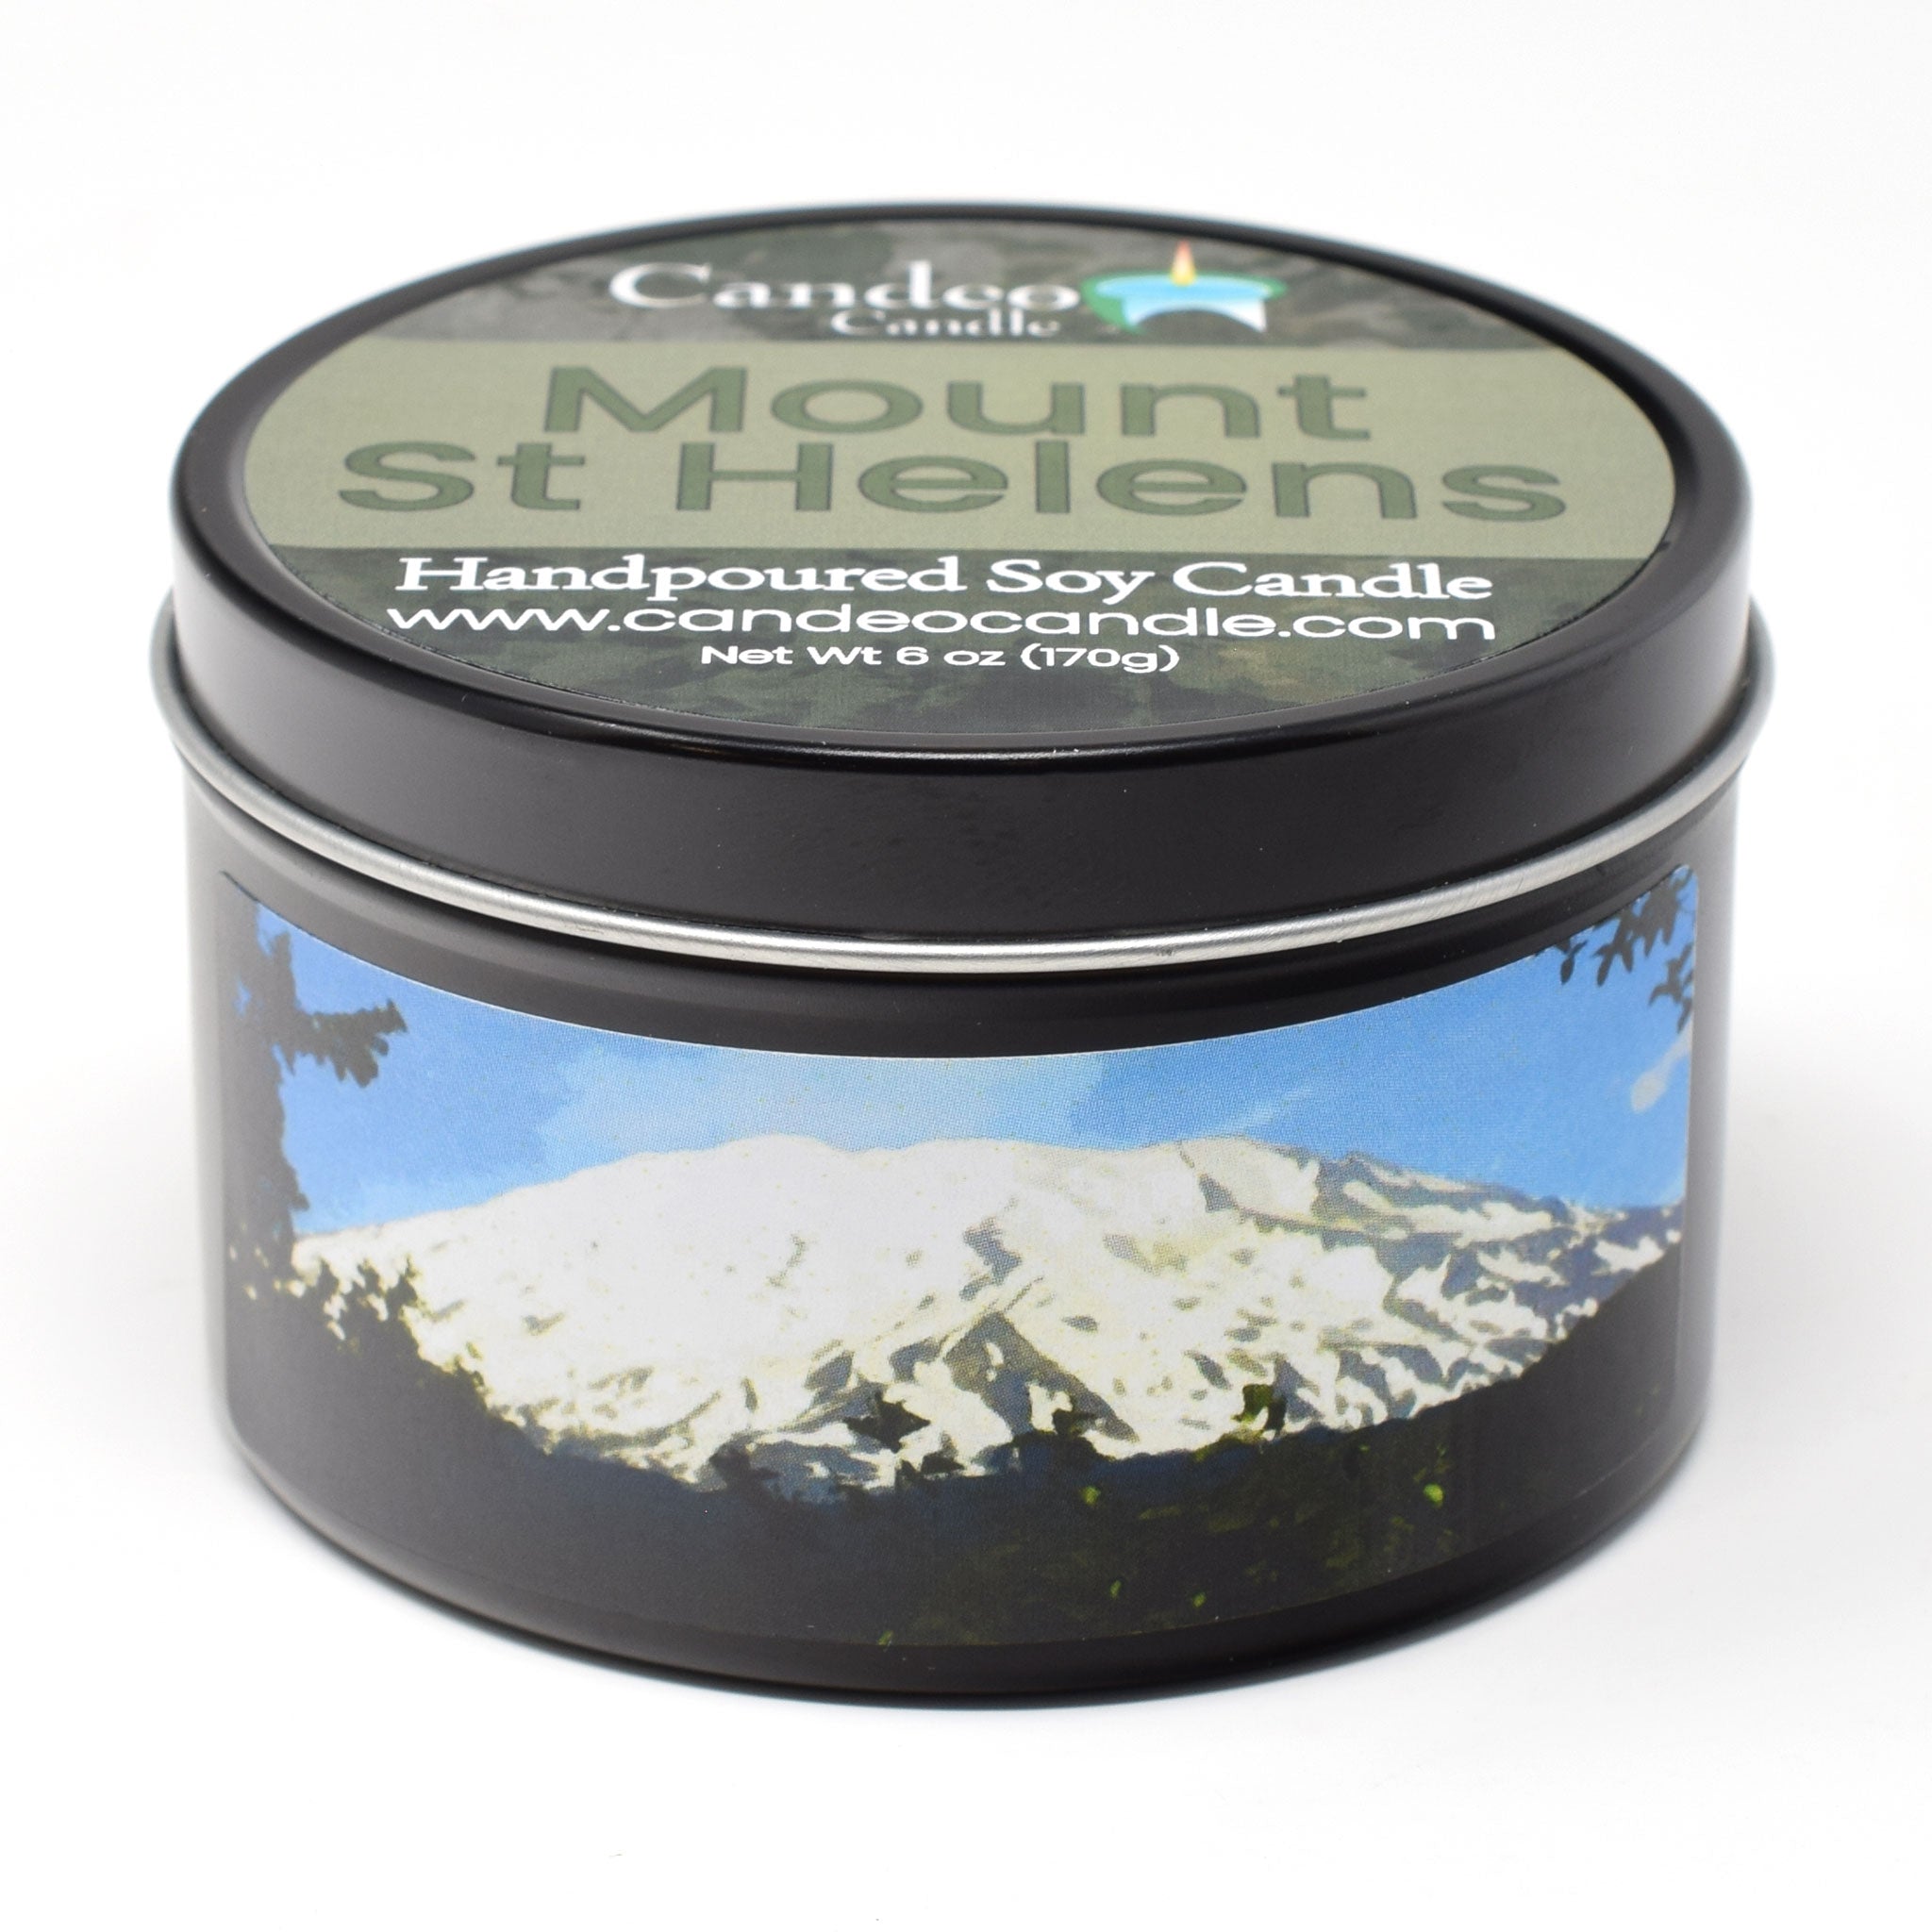 Mount St. Helens, Essential Oil Blend, 6oz Soy Candle Tin